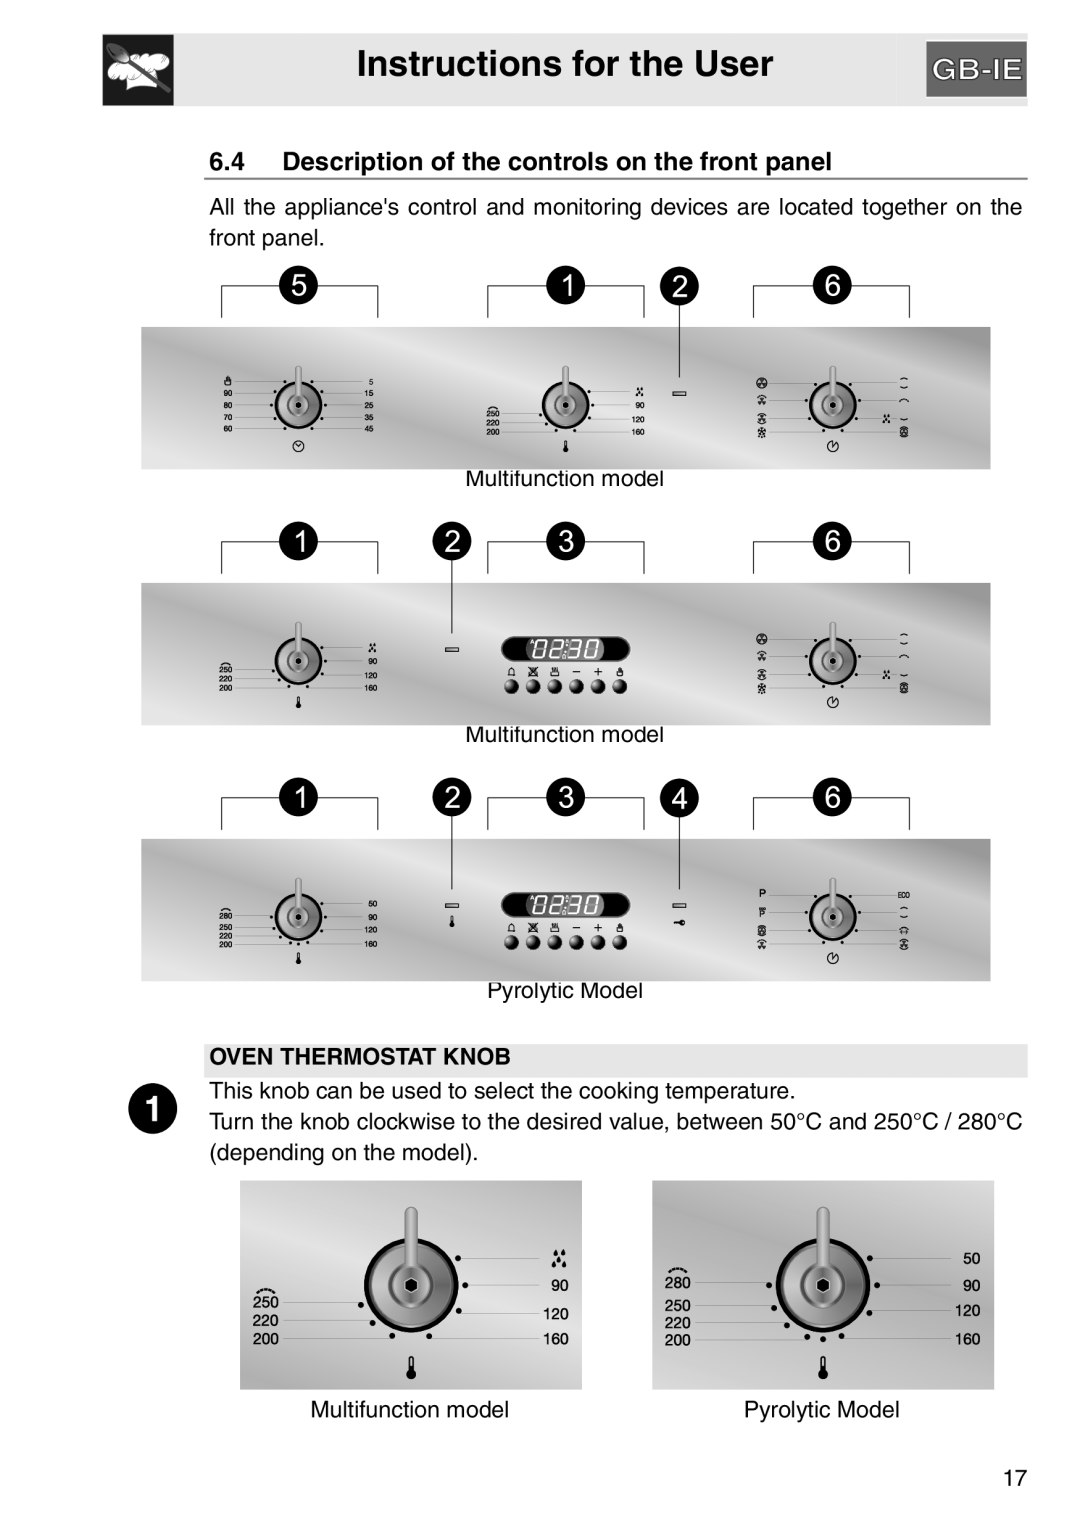 Smeg SA561X-9 Description of the controls on the front panel, Instructions for the User, Oven Thermostat Knob 